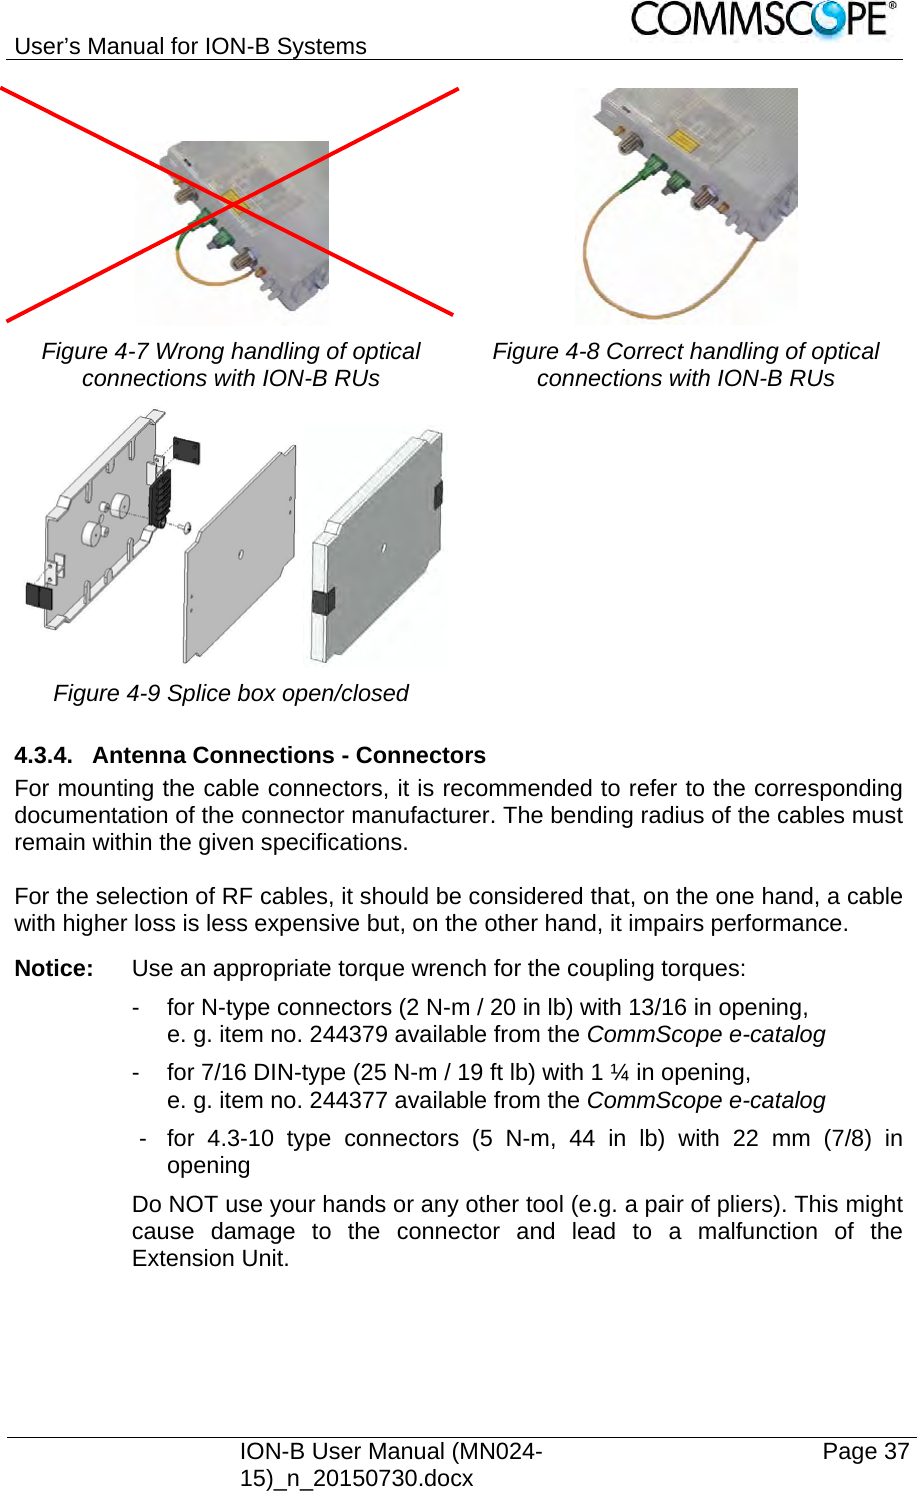 User’s Manual for ION-B Systems    ION-B User Manual (MN024-15)_n_20150730.docx  Page 37     Figure 4-7 Wrong handling of optical connections with ION-B RUs  Figure 4-8 Correct handling of optical connections with ION-B RUs  Figure 4-9 Splice box open/closed   4.3.4.  Antenna Connections - Connectors For mounting the cable connectors, it is recommended to refer to the corresponding documentation of the connector manufacturer. The bending radius of the cables must remain within the given specifications.  For the selection of RF cables, it should be considered that, on the one hand, a cable with higher loss is less expensive but, on the other hand, it impairs performance. Notice:  Use an appropriate torque wrench for the coupling torques:   -  for N-type connectors (2 N-m / 20 in lb) with 13/16 in opening,      e. g. item no. 244379 available from the CommScope e-catalog   -  for 7/16 DIN-type (25 N-m / 19 ft lb) with 1 ¼ in opening,      e. g. item no. 244377 available from the CommScope e-catalog   -  for 4.3-10 type connectors (5 N-m, 44 in lb) with 22 mm (7/8) in opening Do NOT use your hands or any other tool (e.g. a pair of pliers). This might cause damage to the connector and lead to a malfunction of the Extension Unit. 